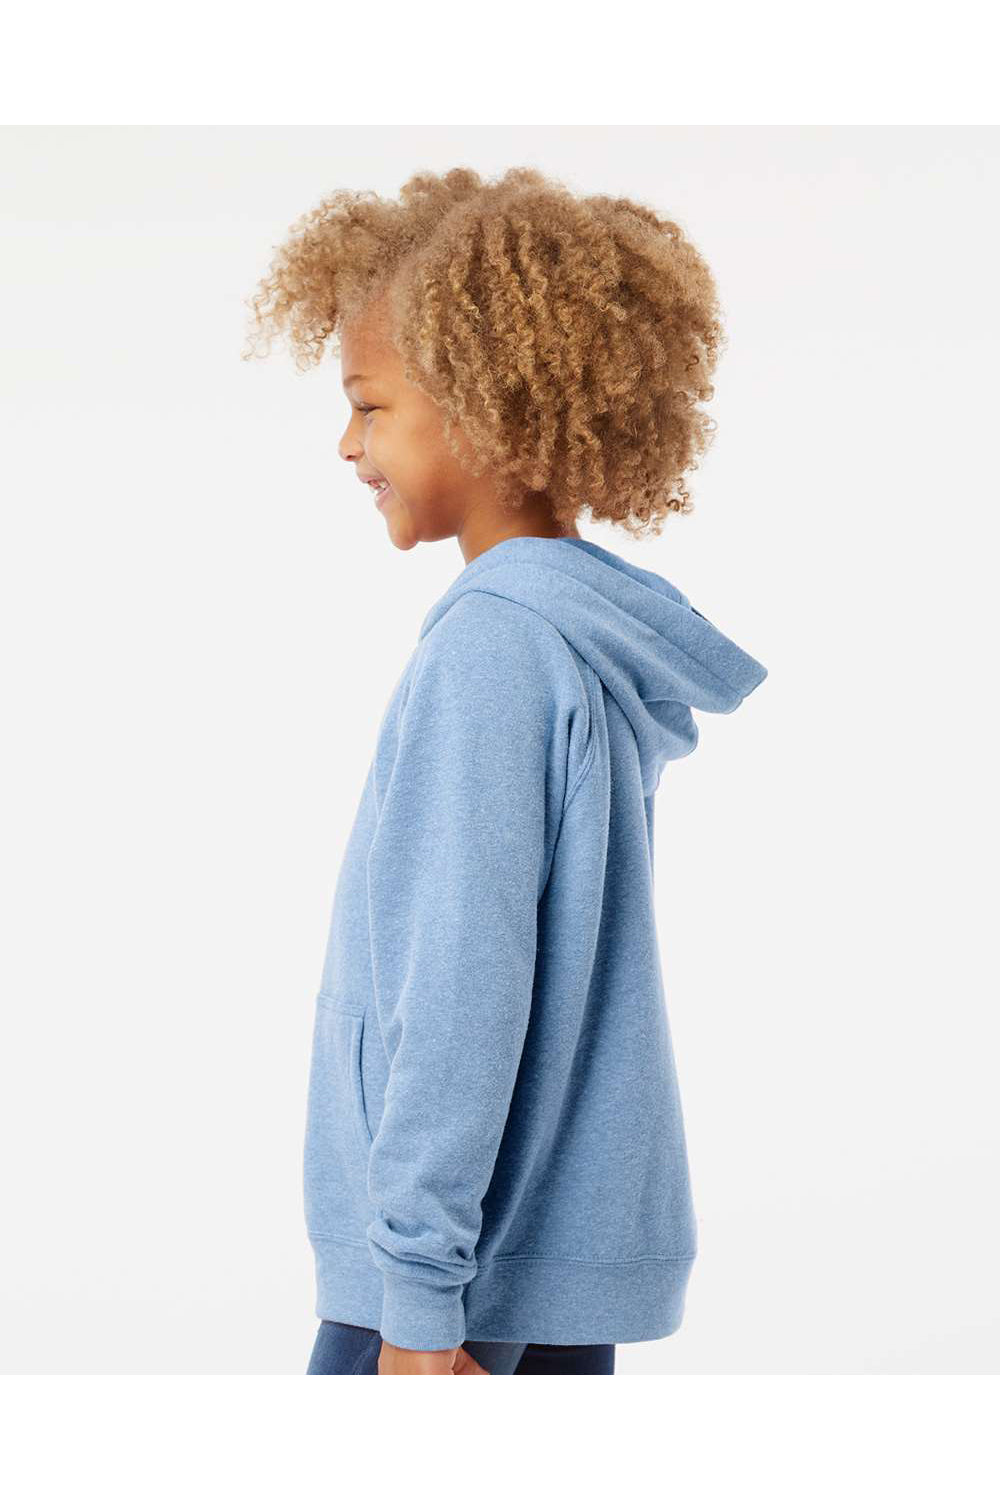 Independent Trading Co. PRM15YSB Youth Special Blend Raglan Hooded Sweatshirt Hoodie Pacific Blue Model Side